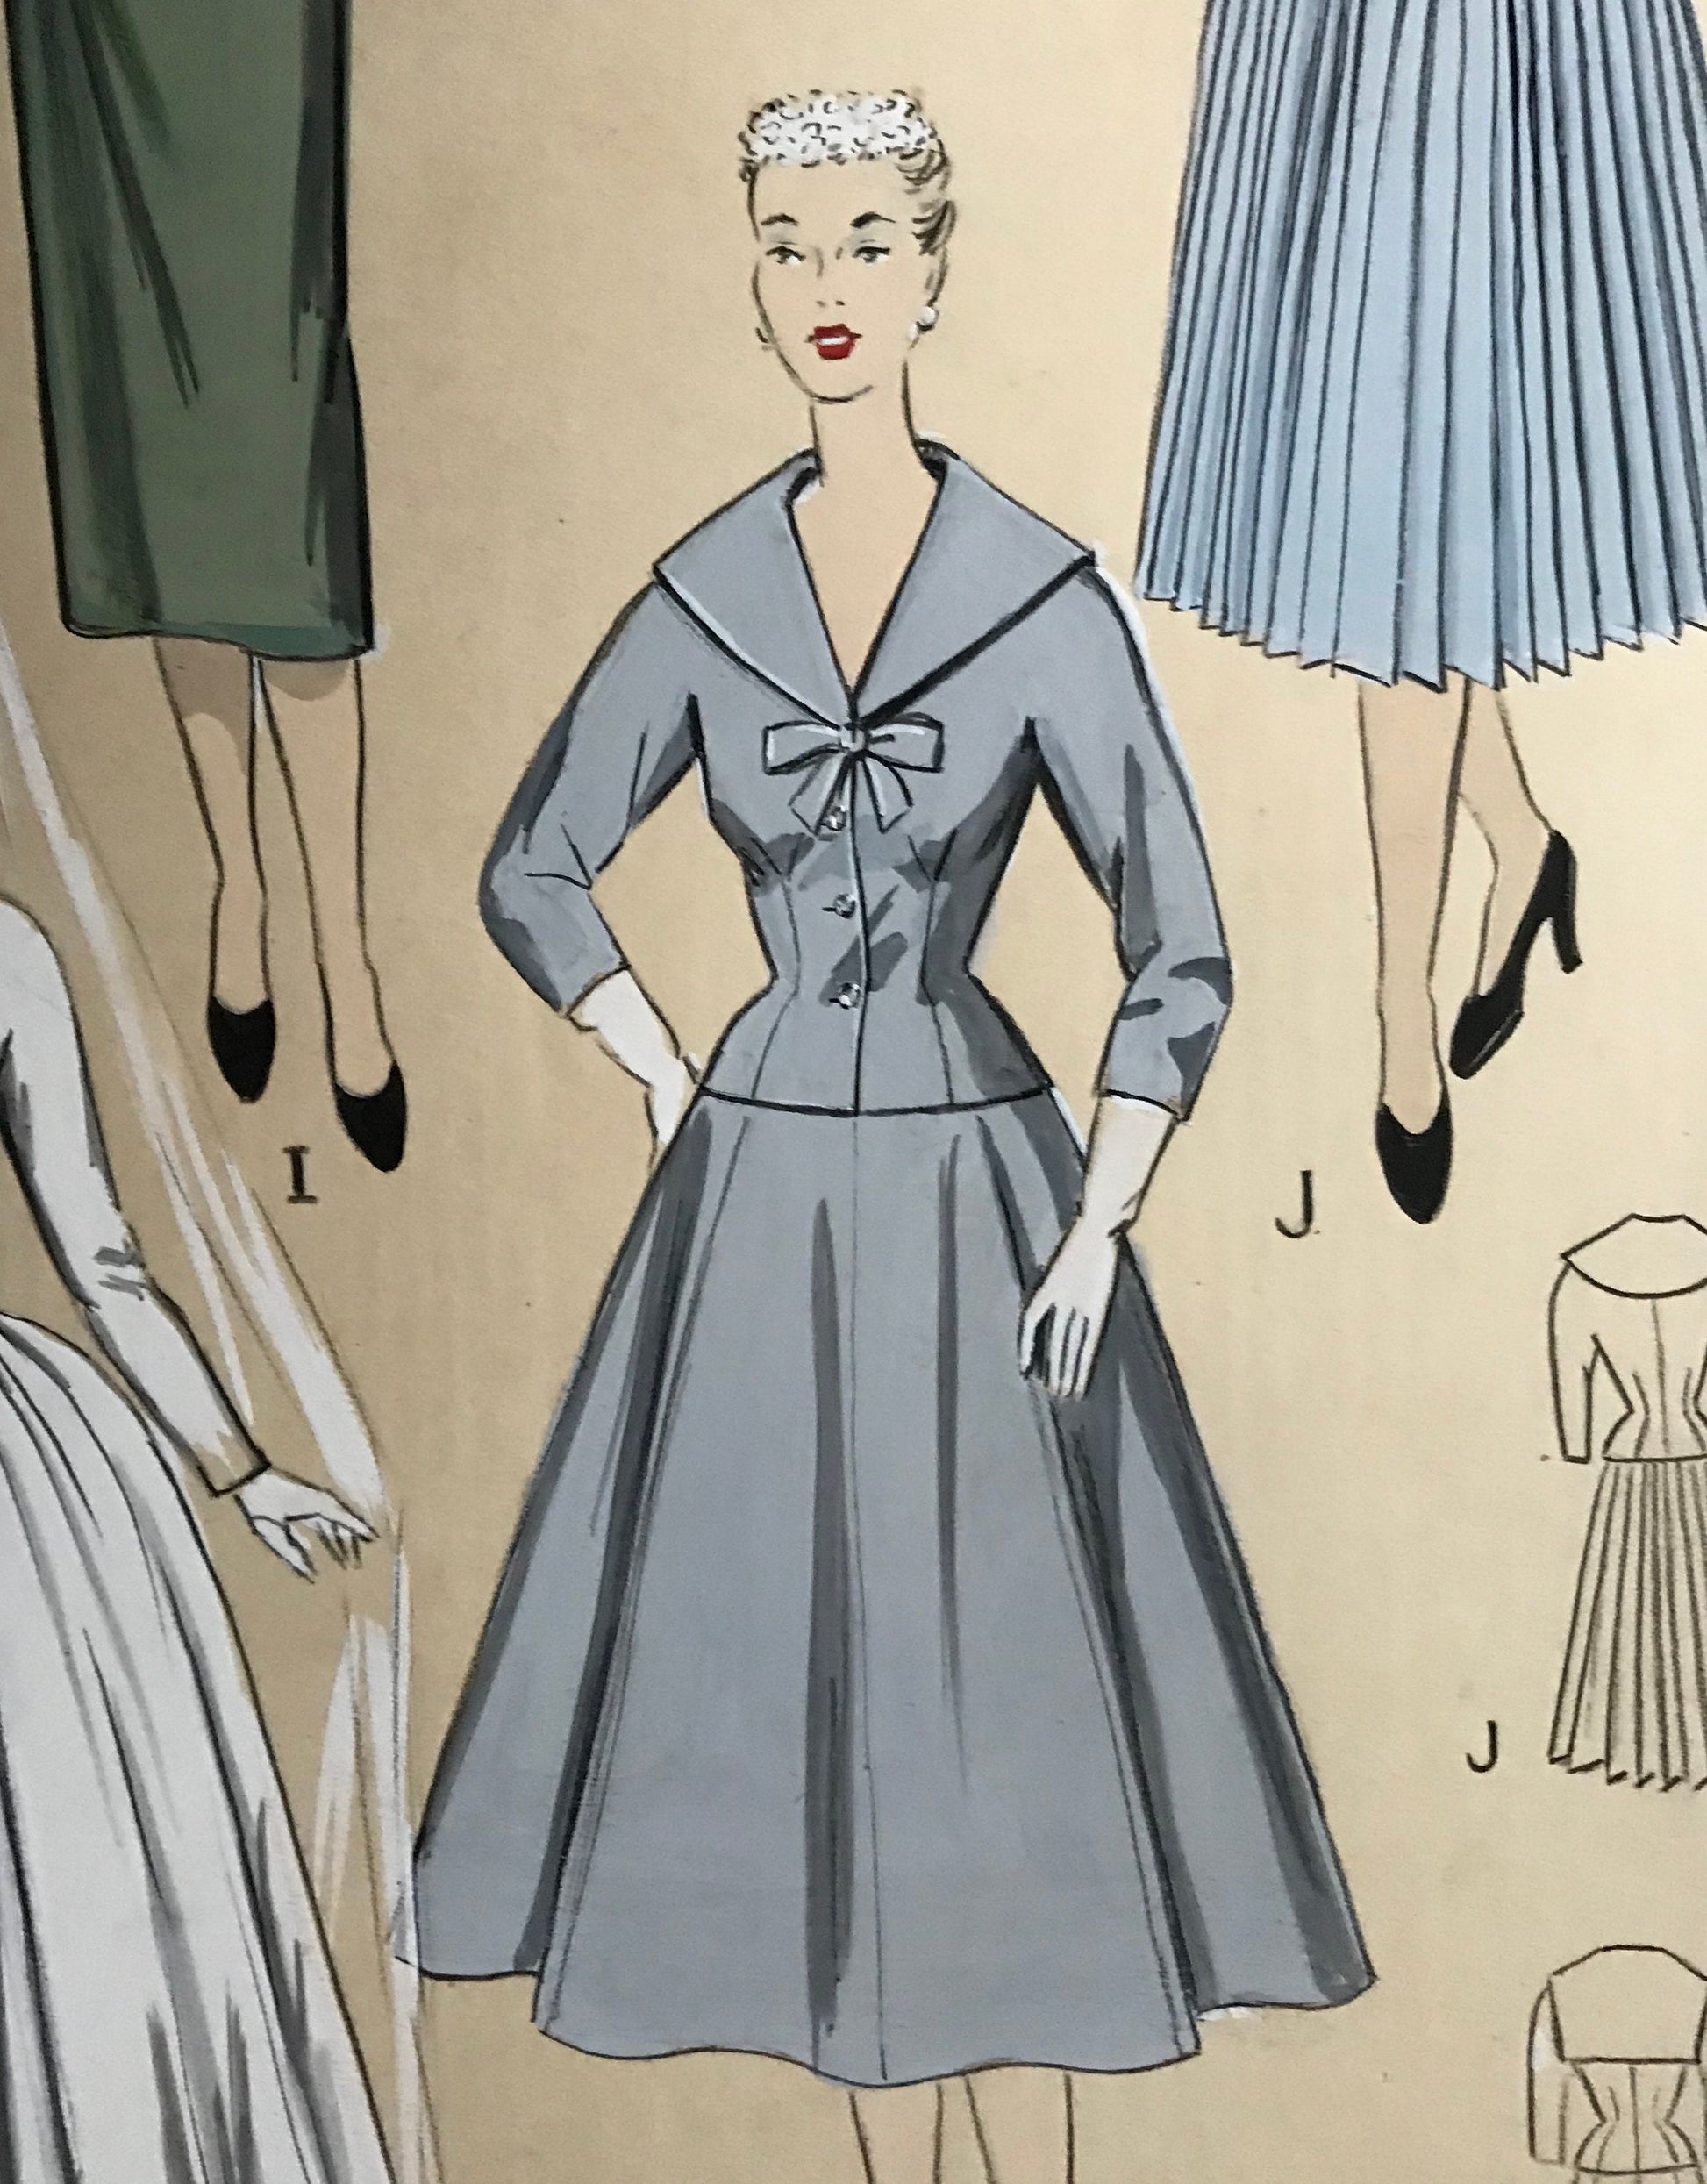 A Large Hand Drawn and Hand Painted Fashion Illustration. From Barcelona, Spain. 1955. Size: 51 x 40.5cms.